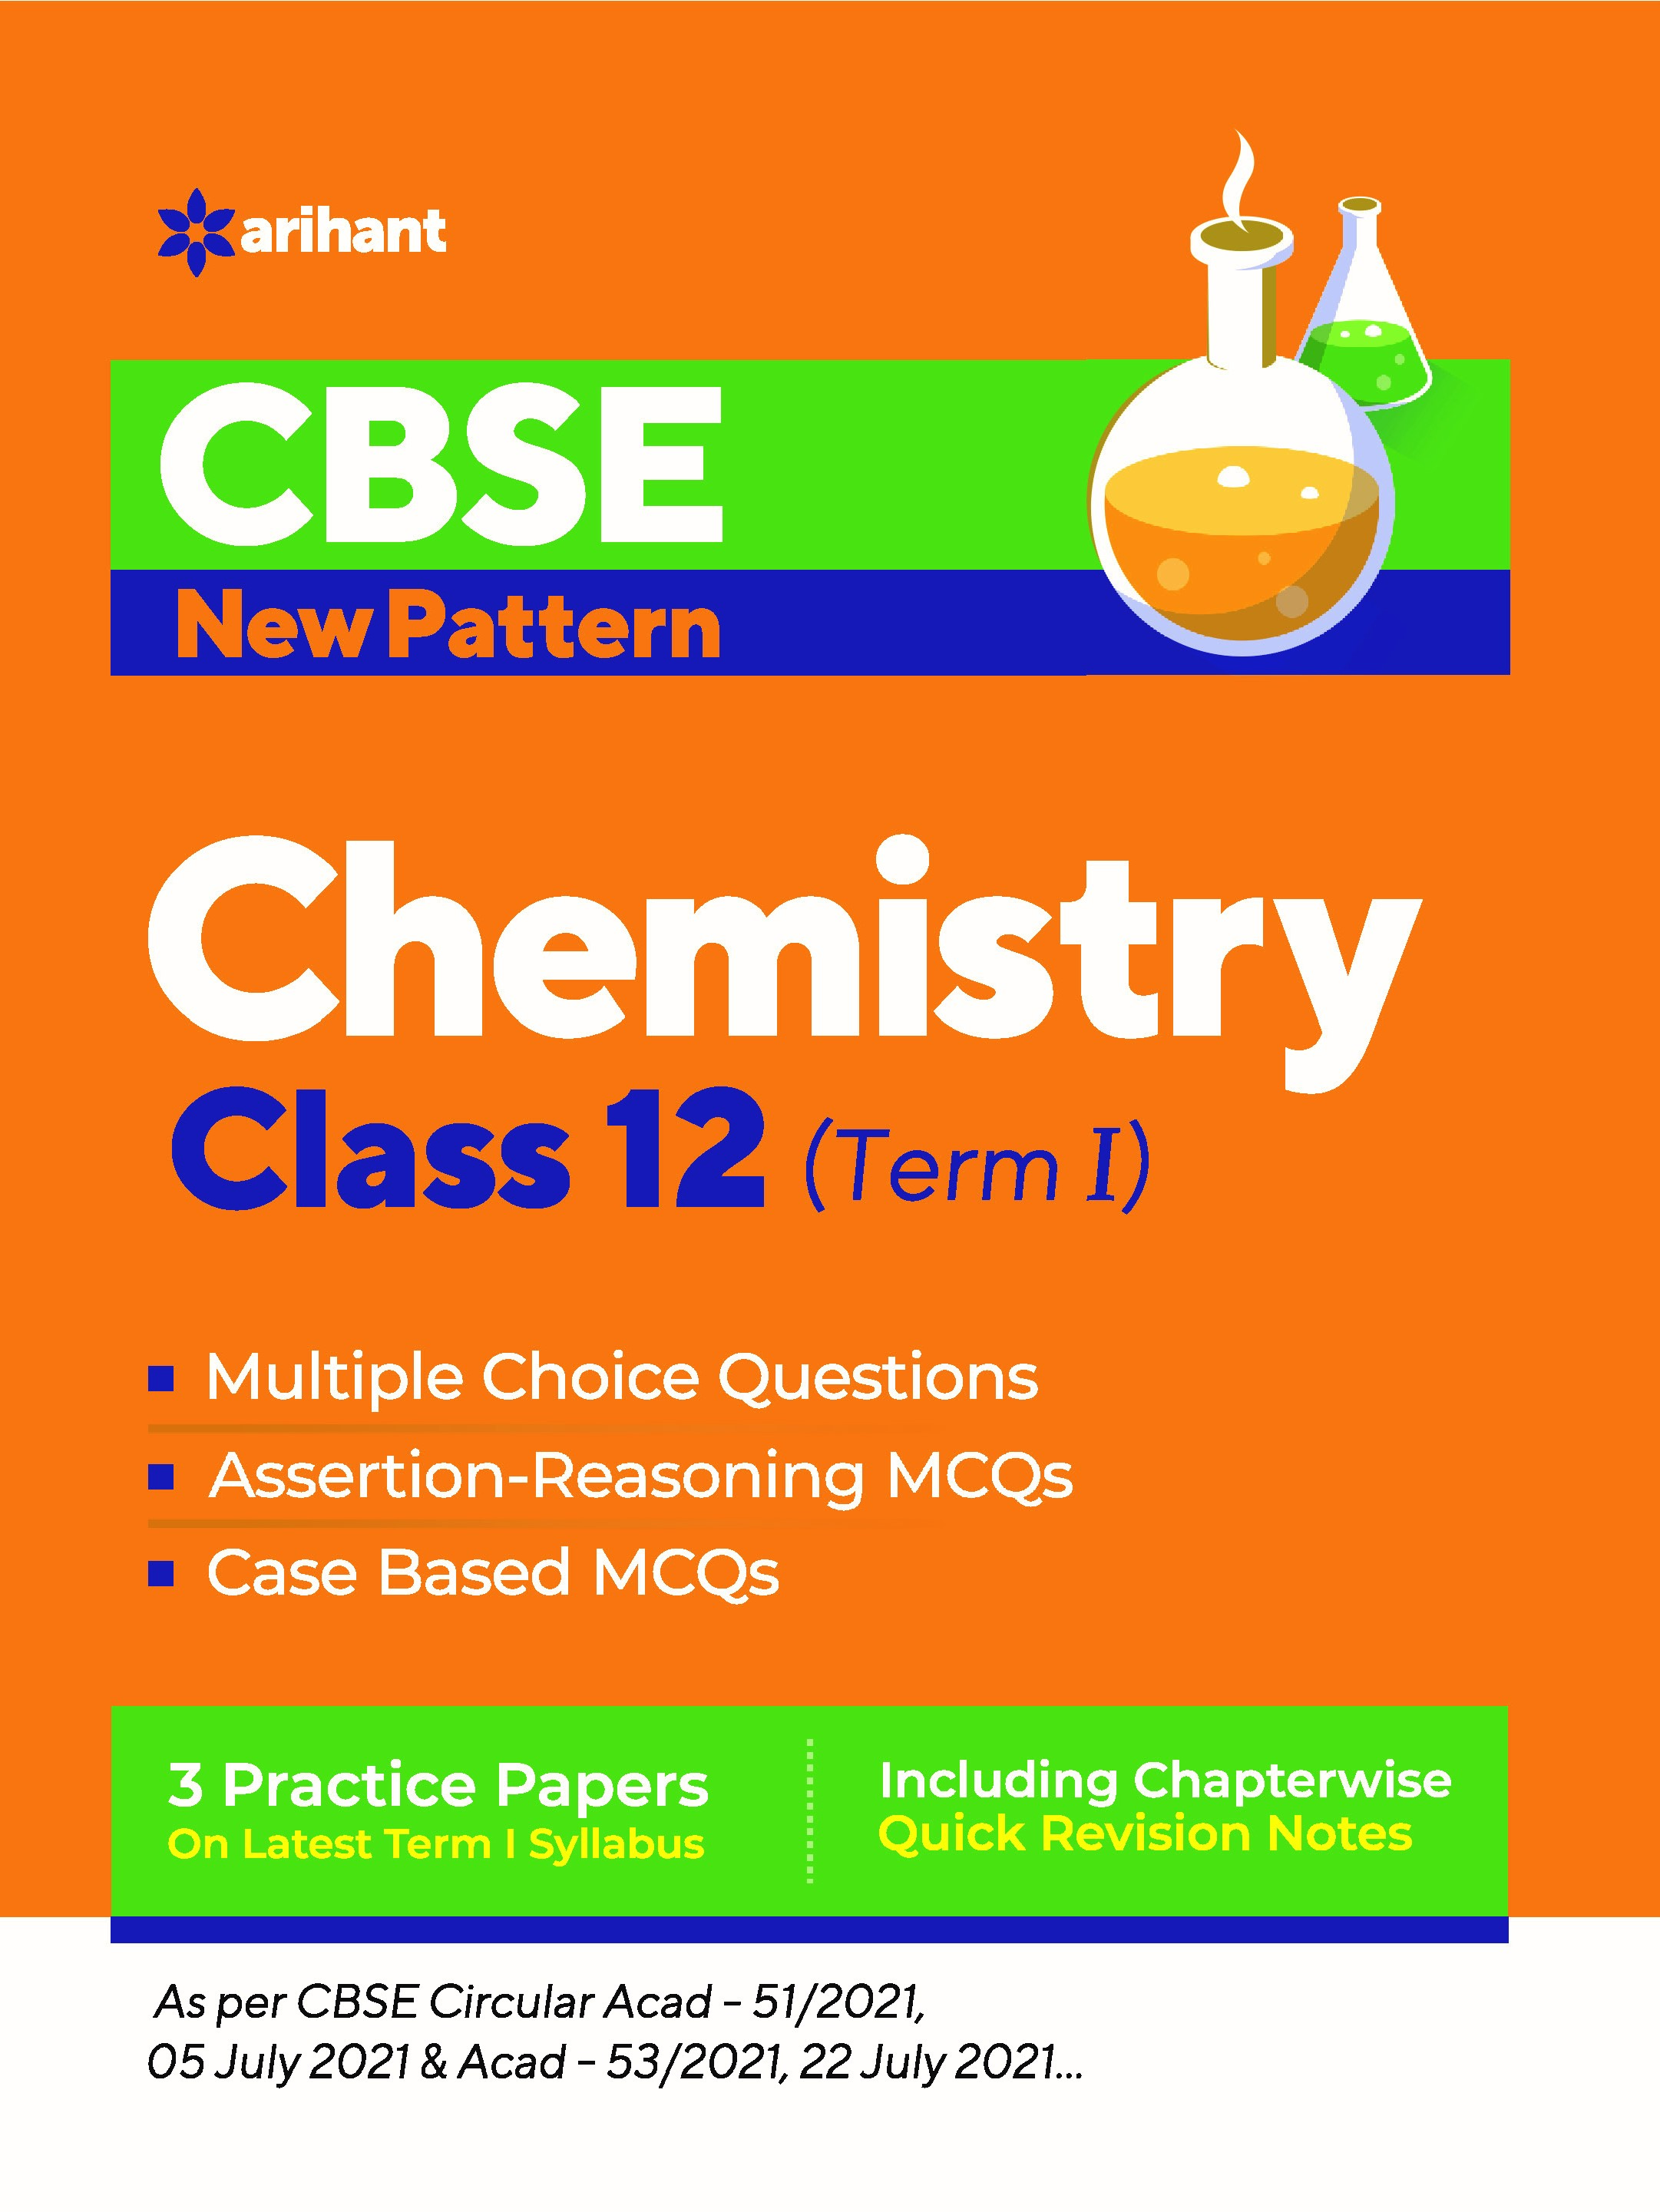 CBSE New Pattern Chemistry Class 12 for 2021-22 Exam (MCQs based book for Term 1)